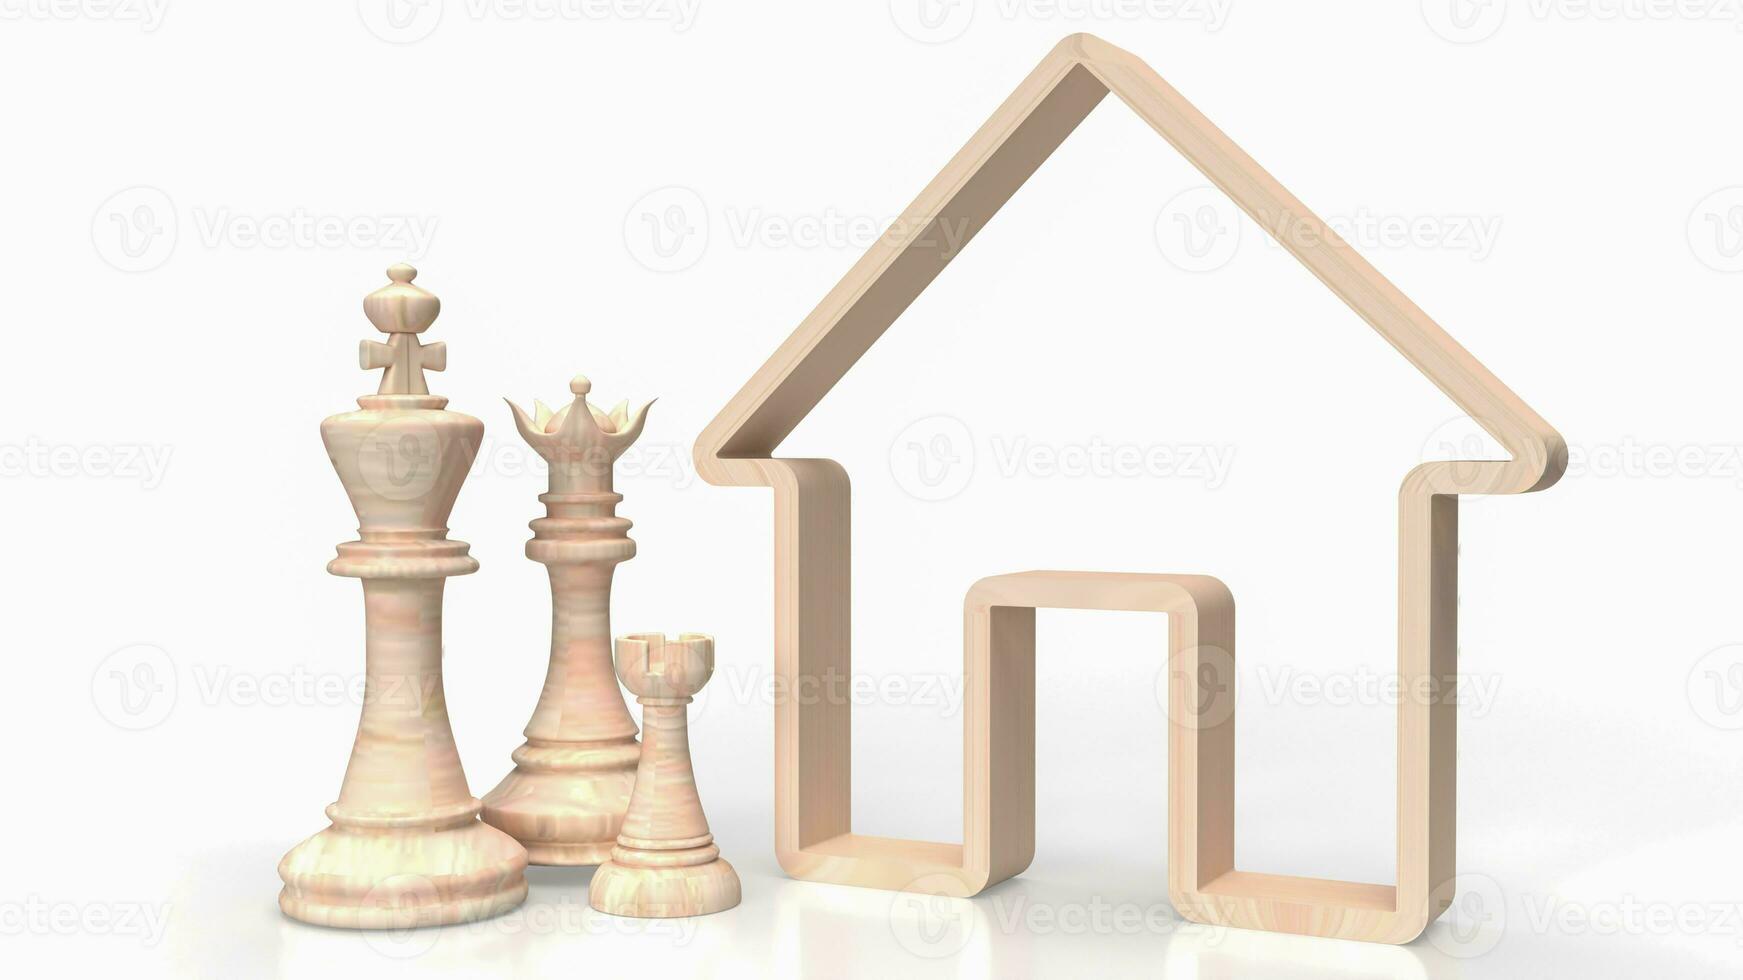 The chess family and house icon for home property Business 3d rendering photo